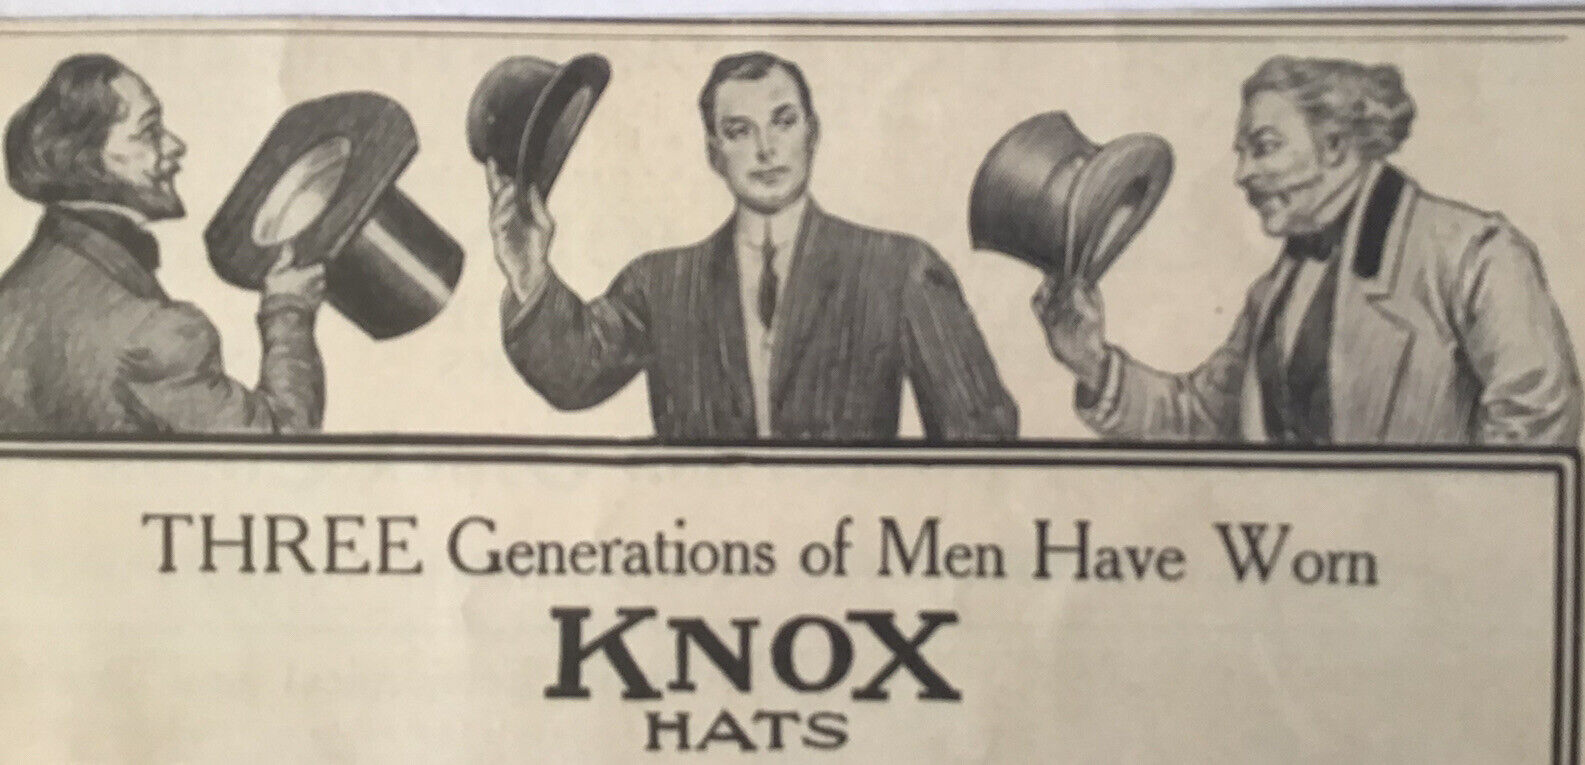 KNOX HATS Antique ADVERTISING Victorian Fashion 1900\'s PRINT AD